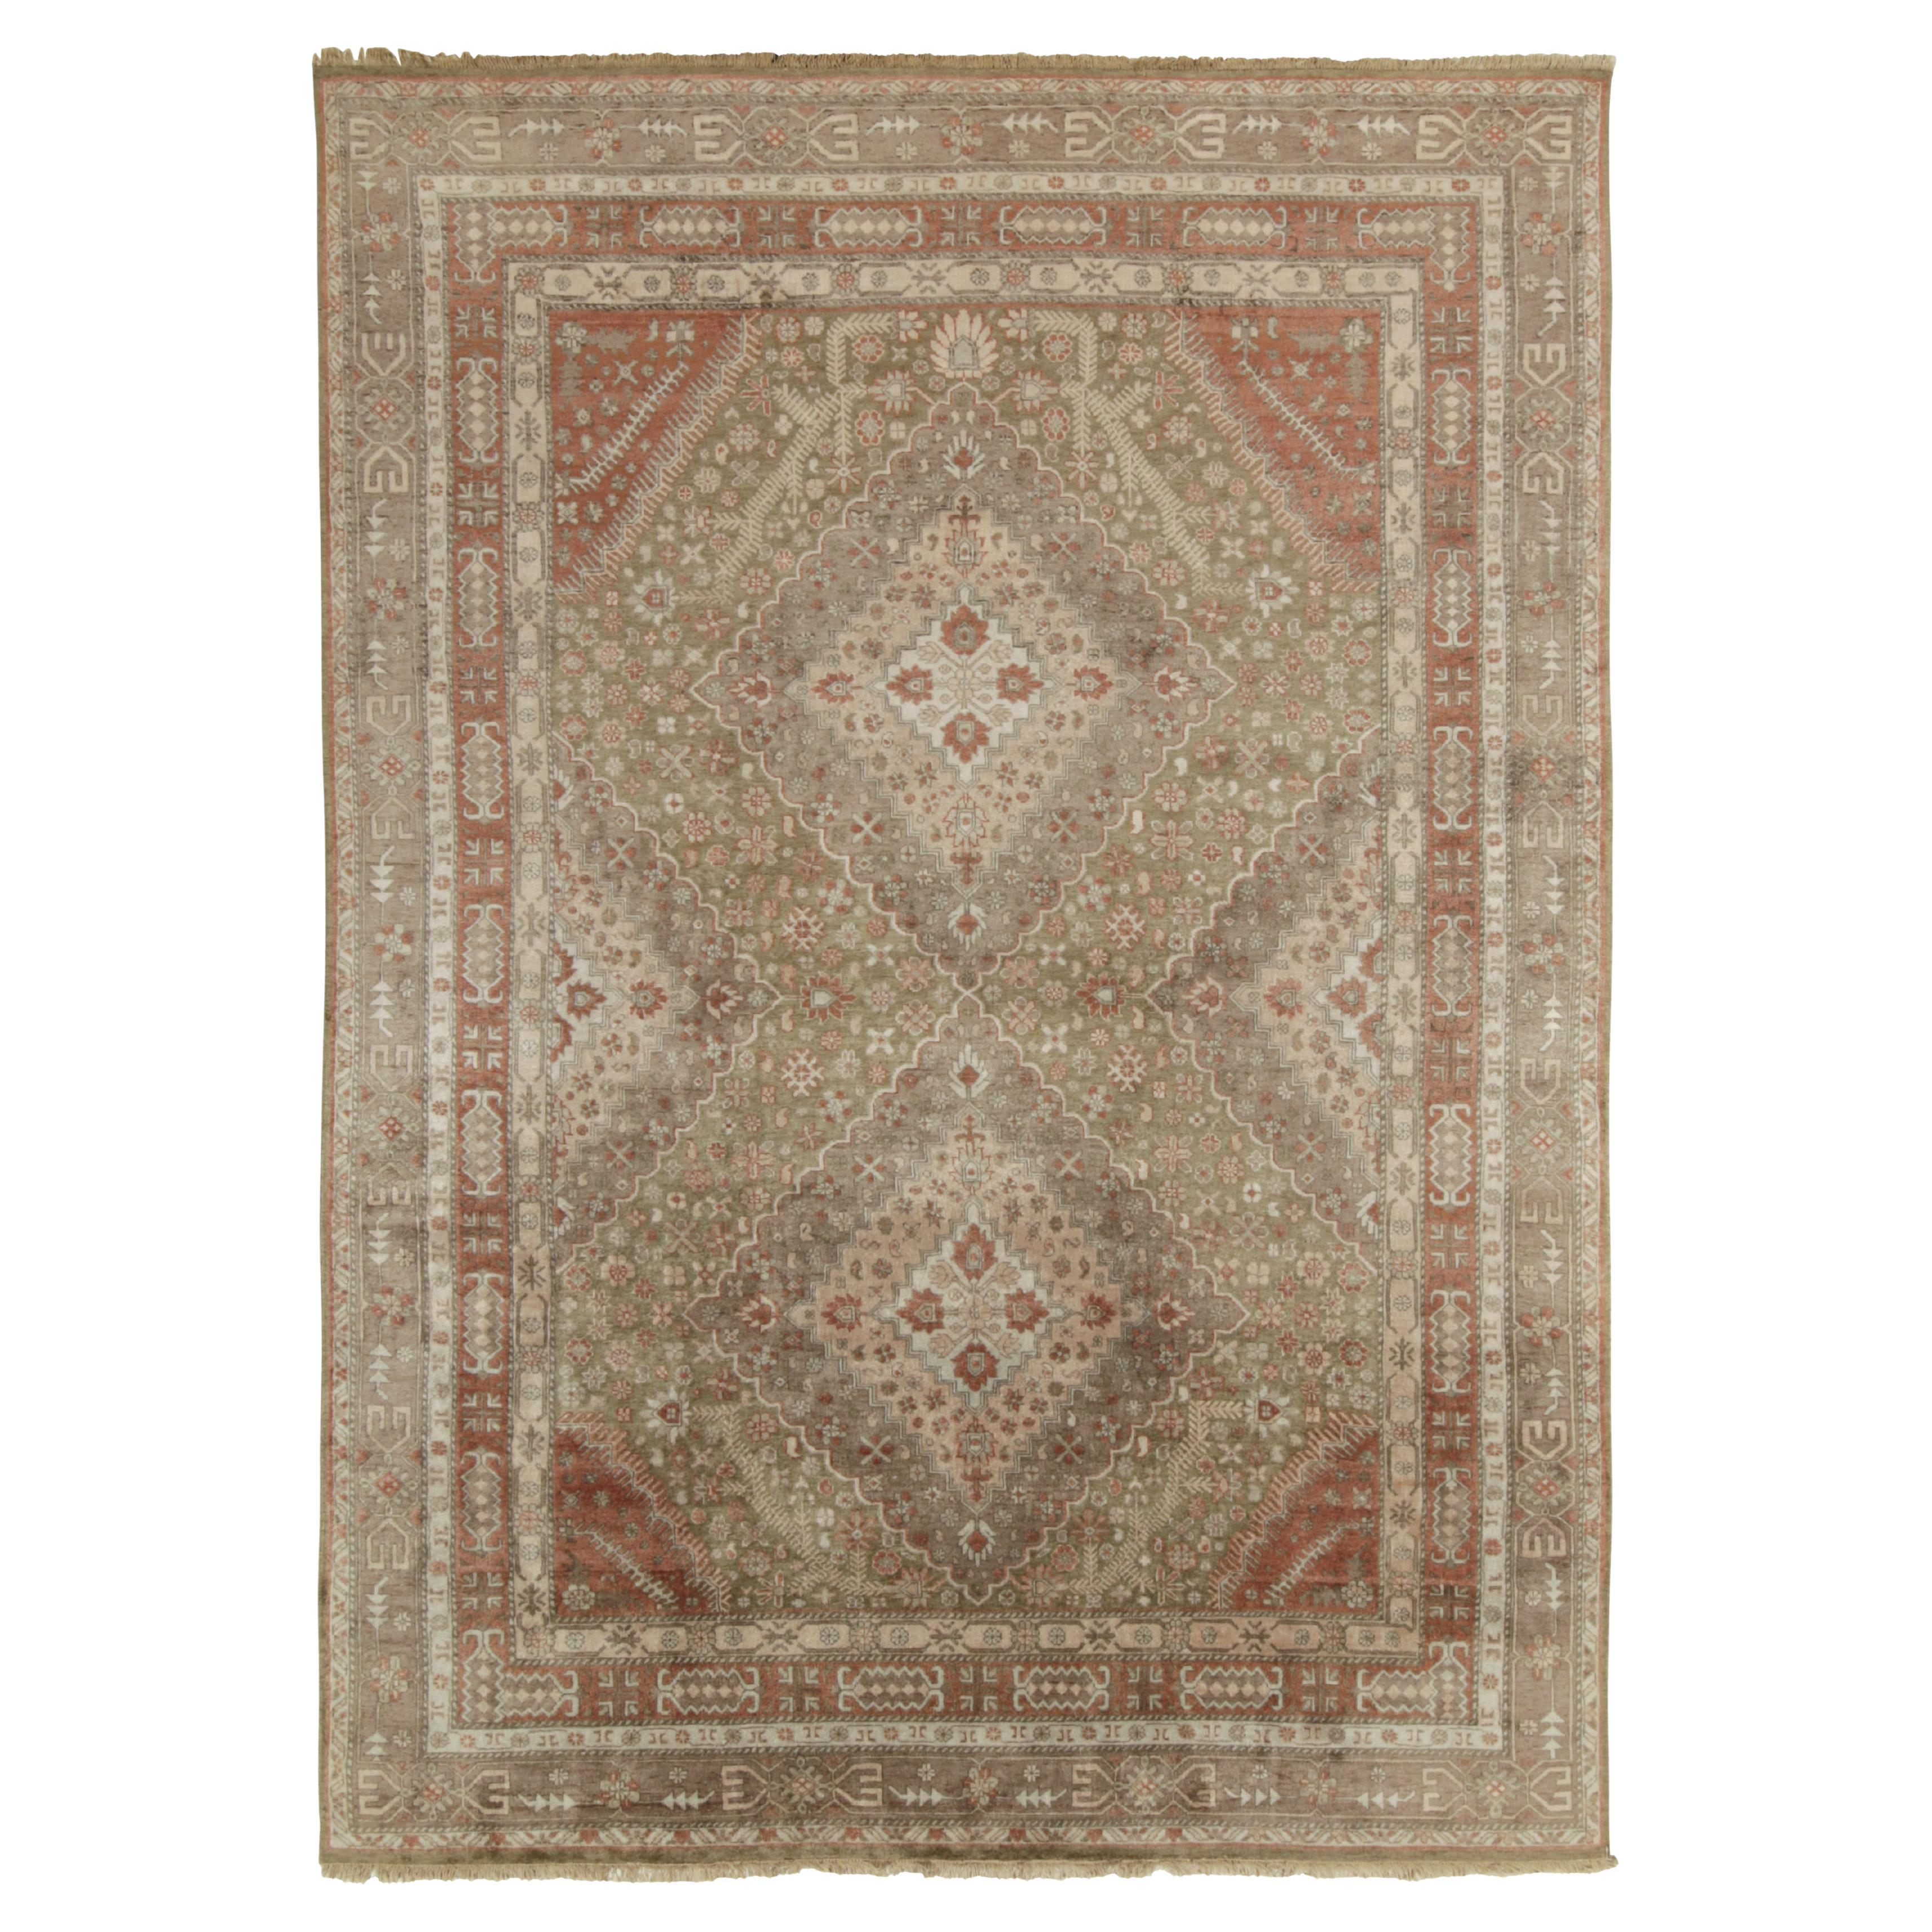 Rug & Kilim’s Classic Khotan Style Rug in Beige, Rust and Ivory Floral Patterns